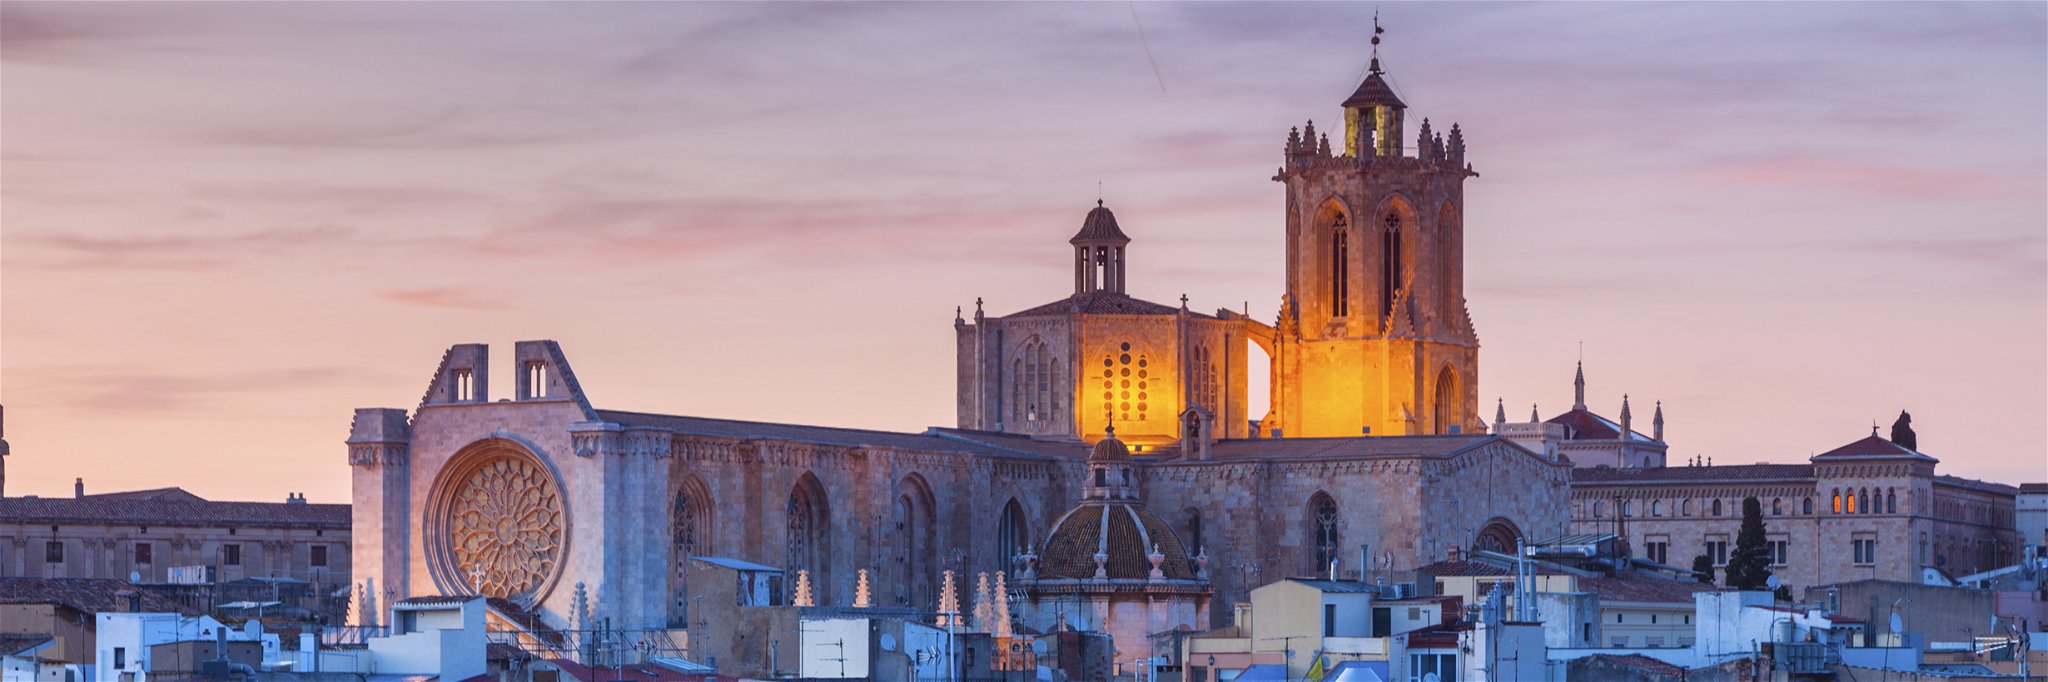 View of the Cathedral of Tarragona, Spain.